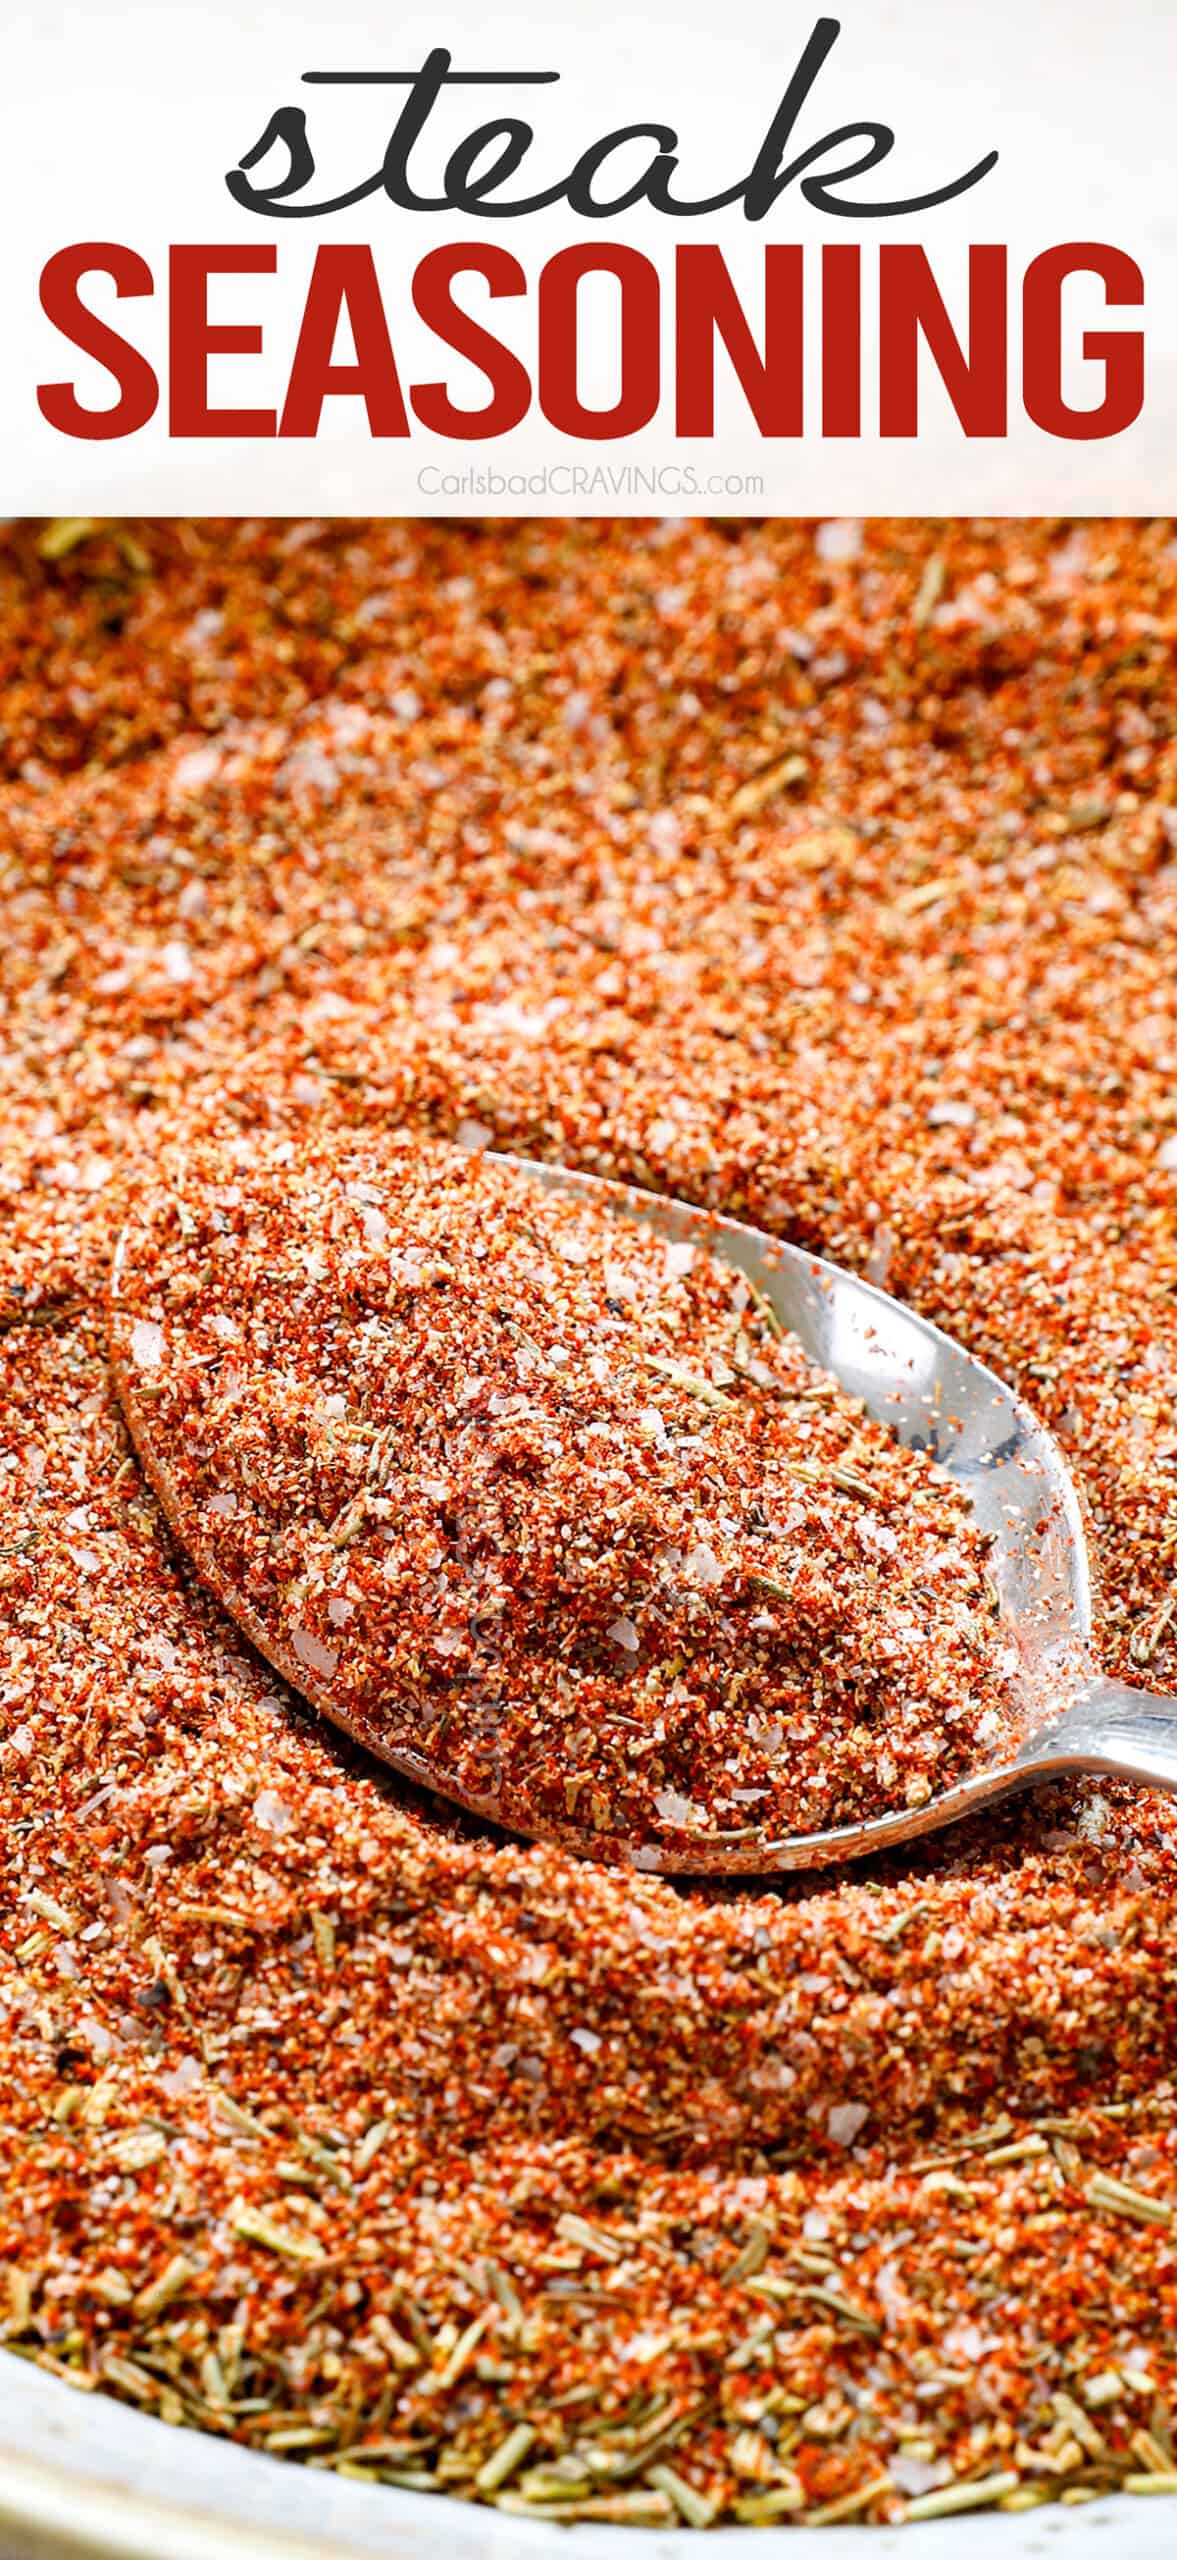 showing how to make steak rub recipe by whisking all of the seasonings together in a bowl